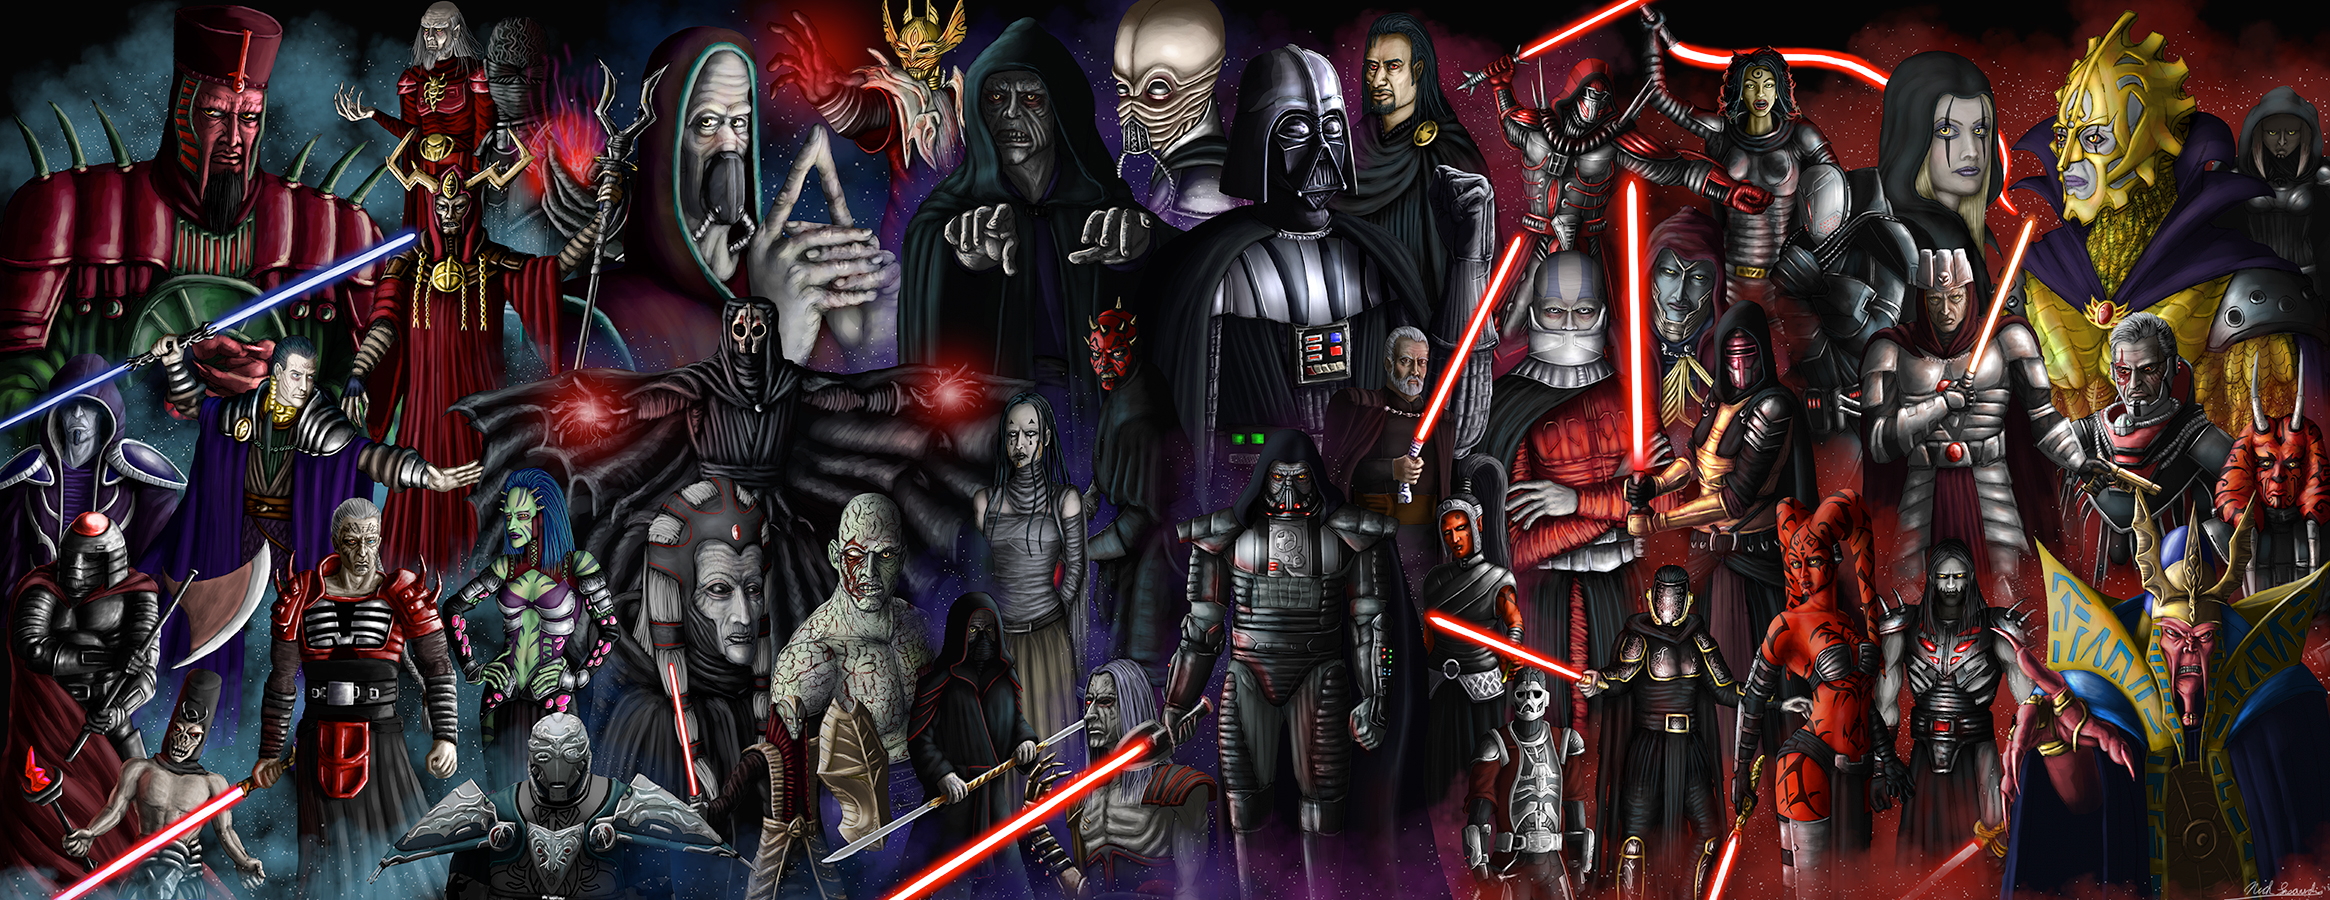 [Bild: the_sith_lords_by_mr_sinister2048-d68164f.jpg]